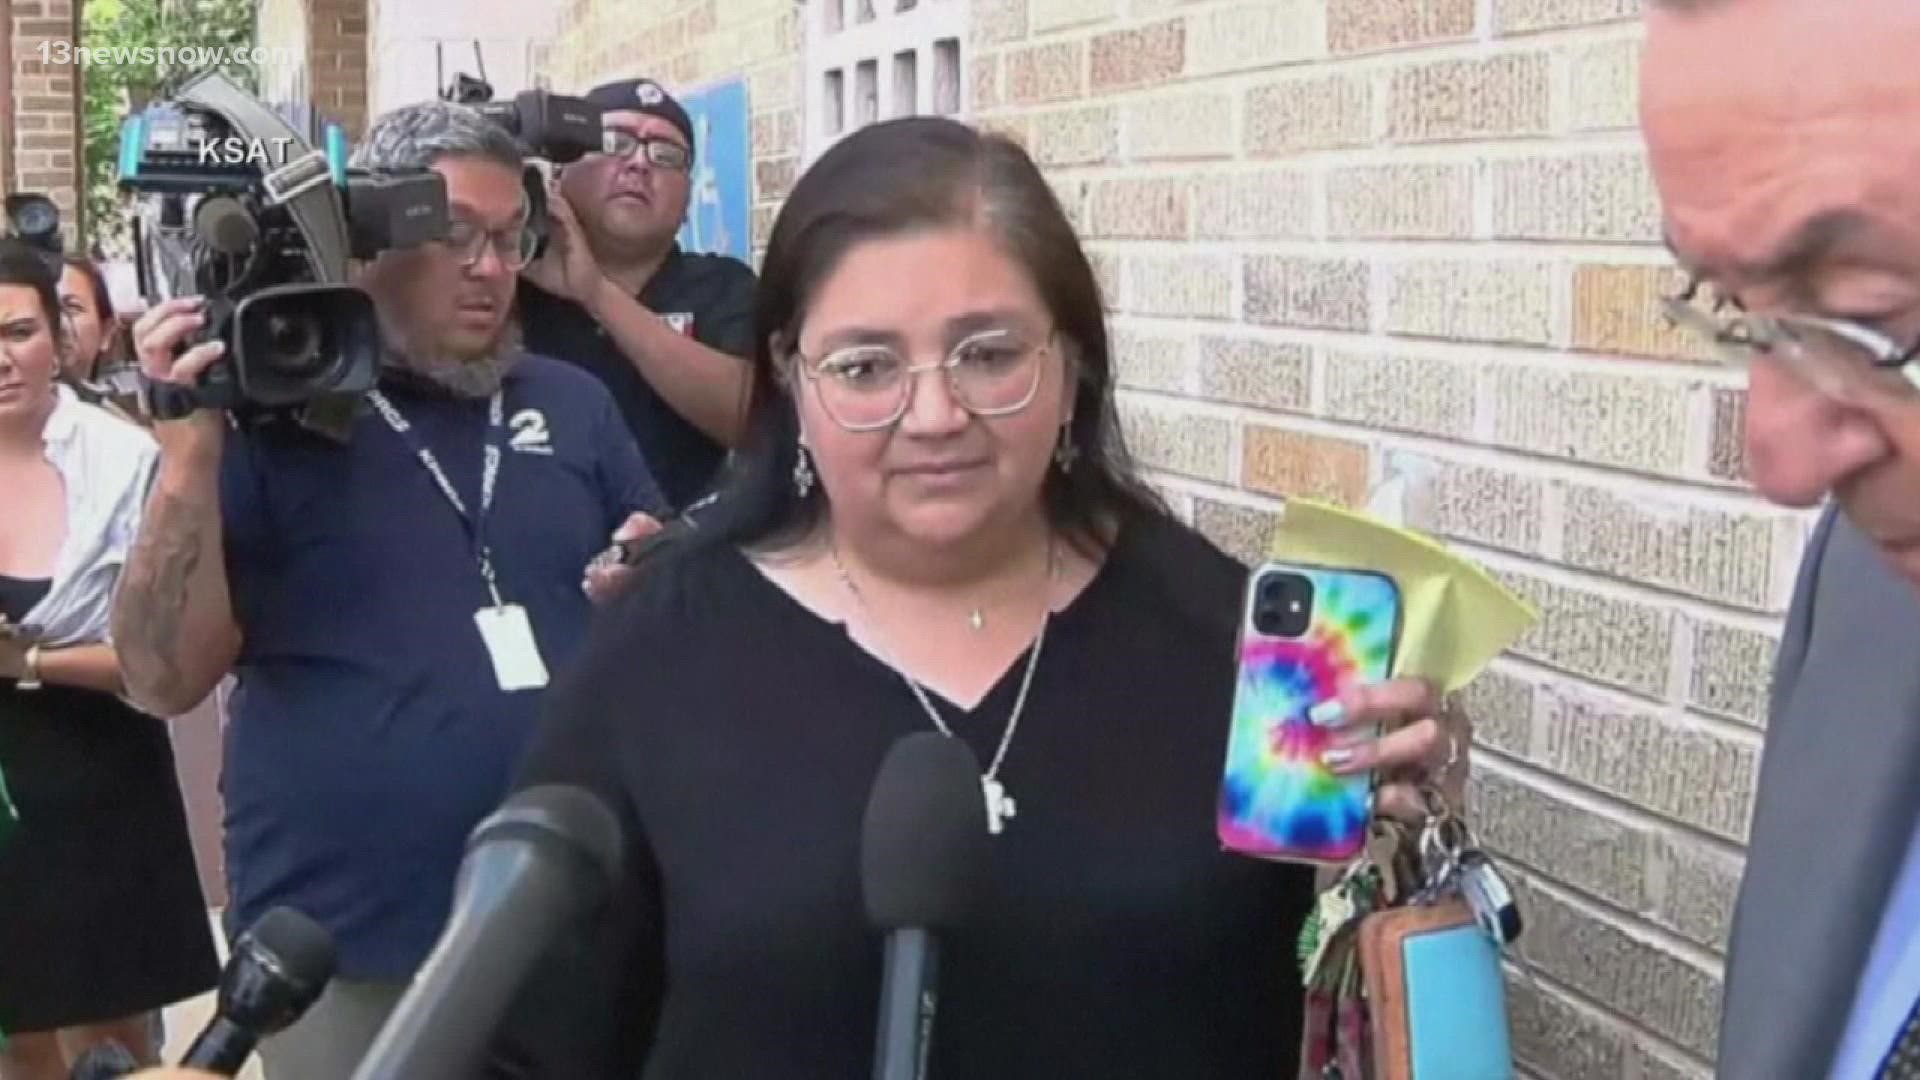 An investigation revealed principal Mindy Gutierrez knew about security problems at the school before the mass shooting that left 19 children and two teachers dead.